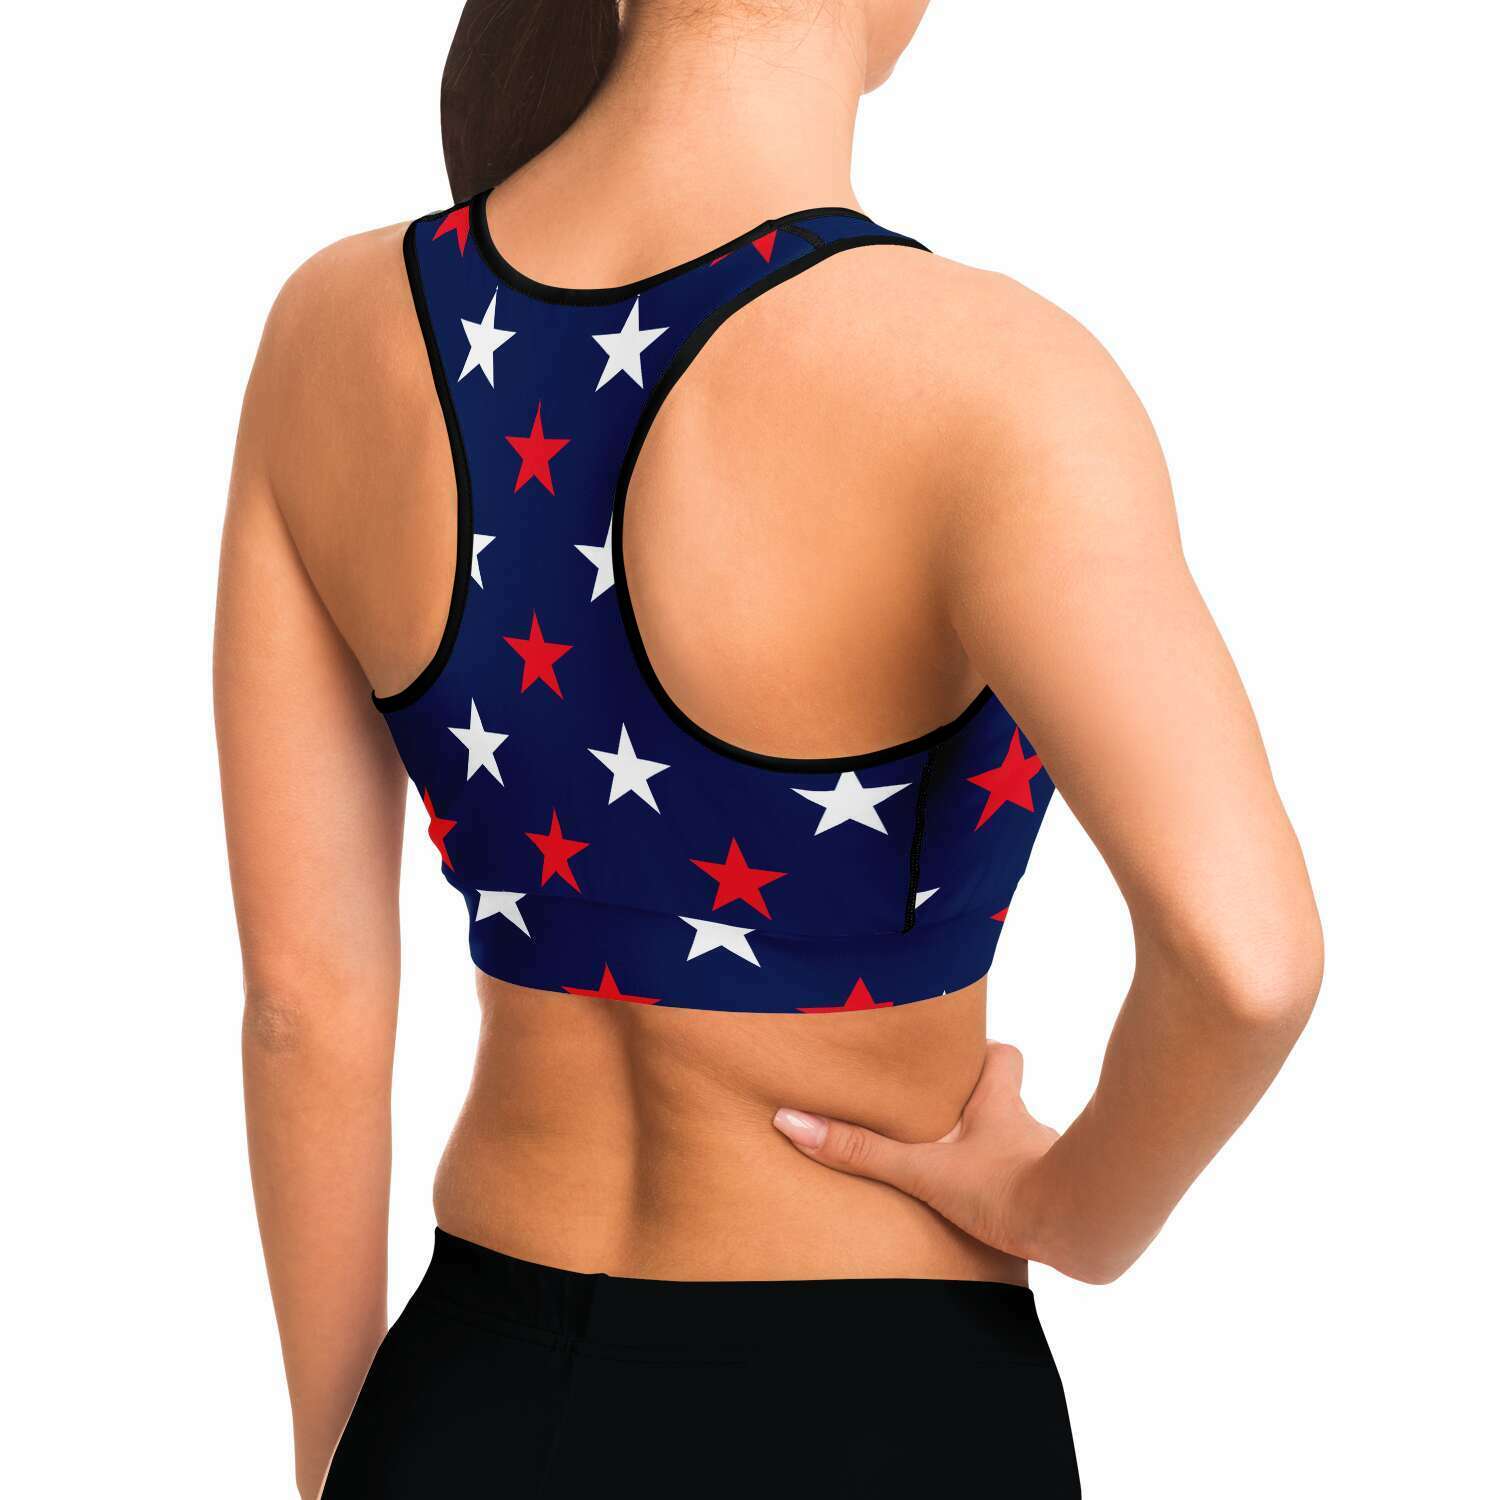 Women's Red White Blue American All-Star Athletic Sports Bra